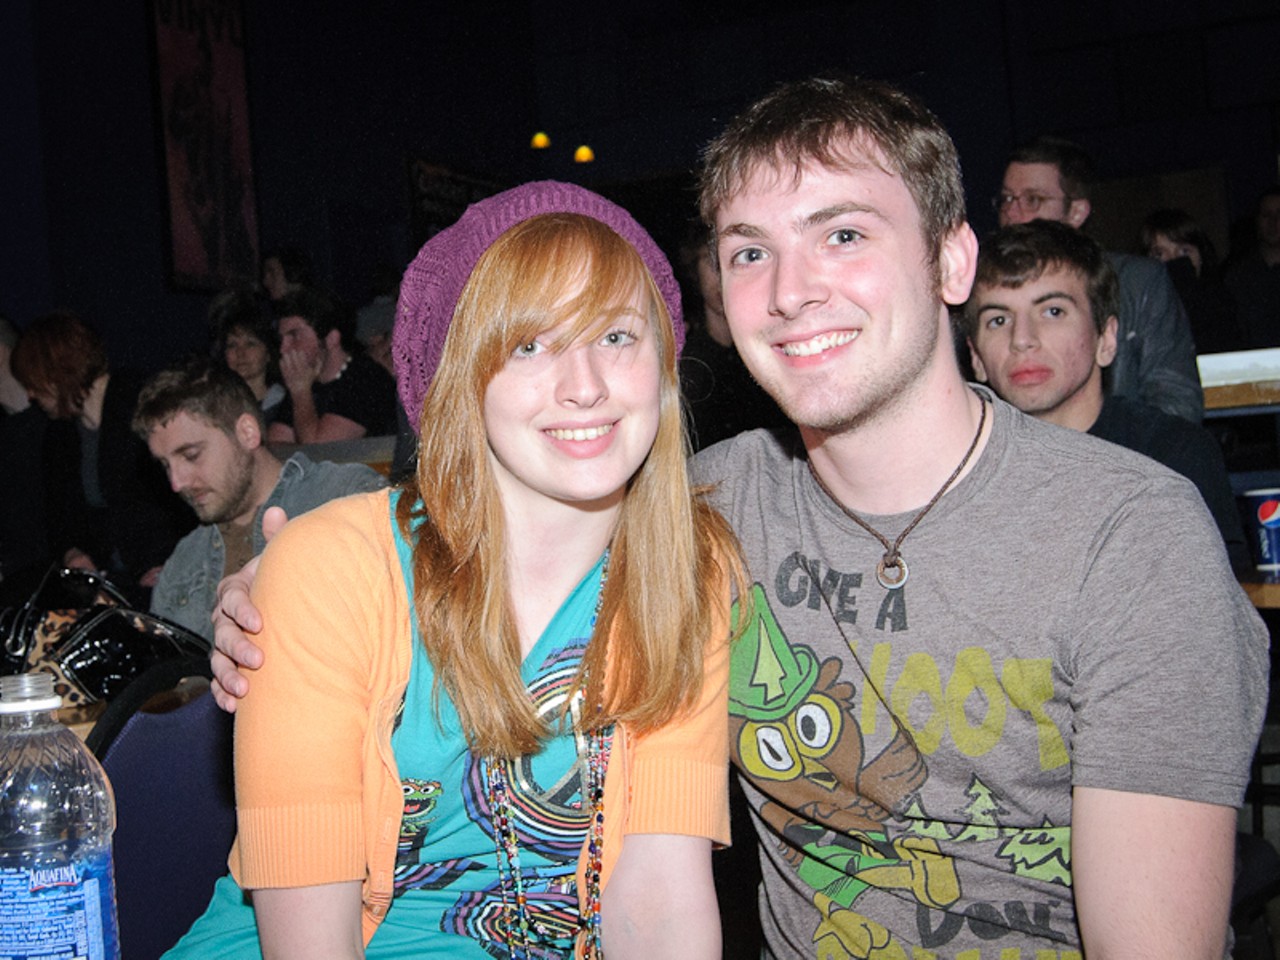 Newlyweds Maggie Cook and Forrest Linn drove in from Pittsburg, Kansas, to see BRMC.